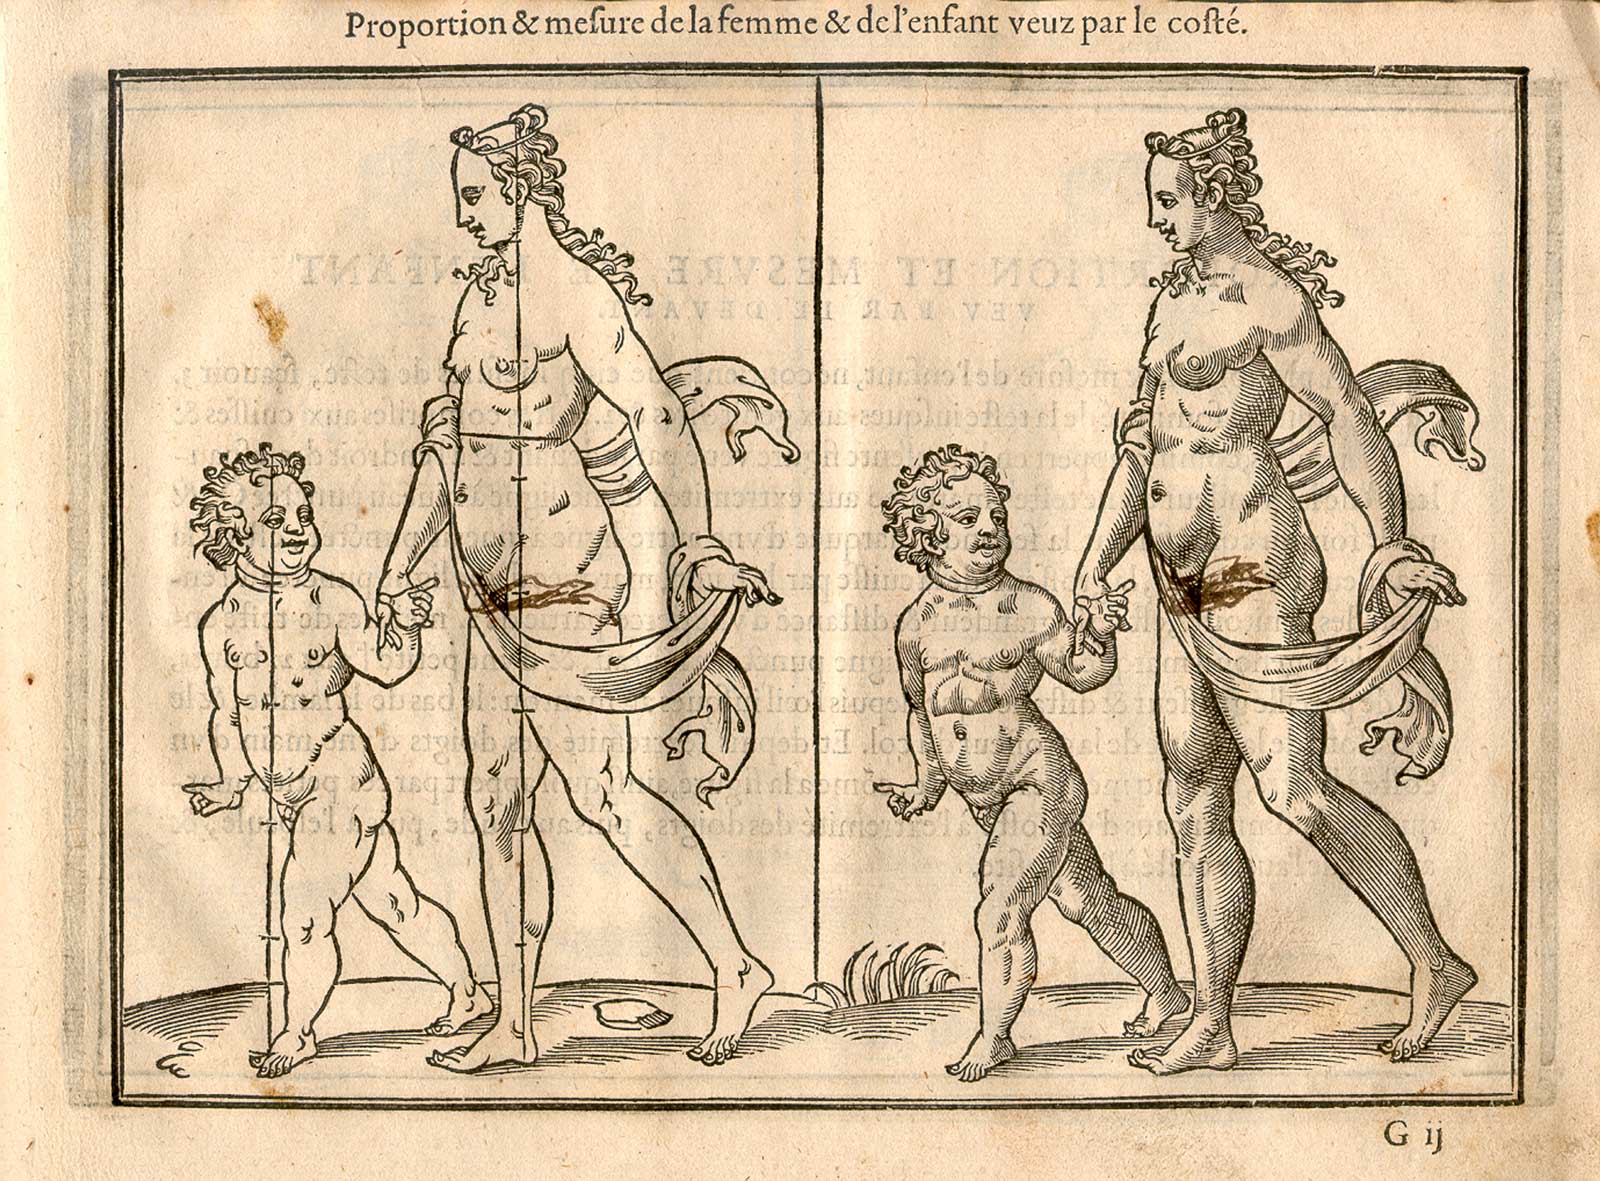 Proportion and measures of female and child figures viewed from the side, from Jehan Cousin’s Livre de pourtraiture, NLM Call no.: WZ 250 C8673L 1608.